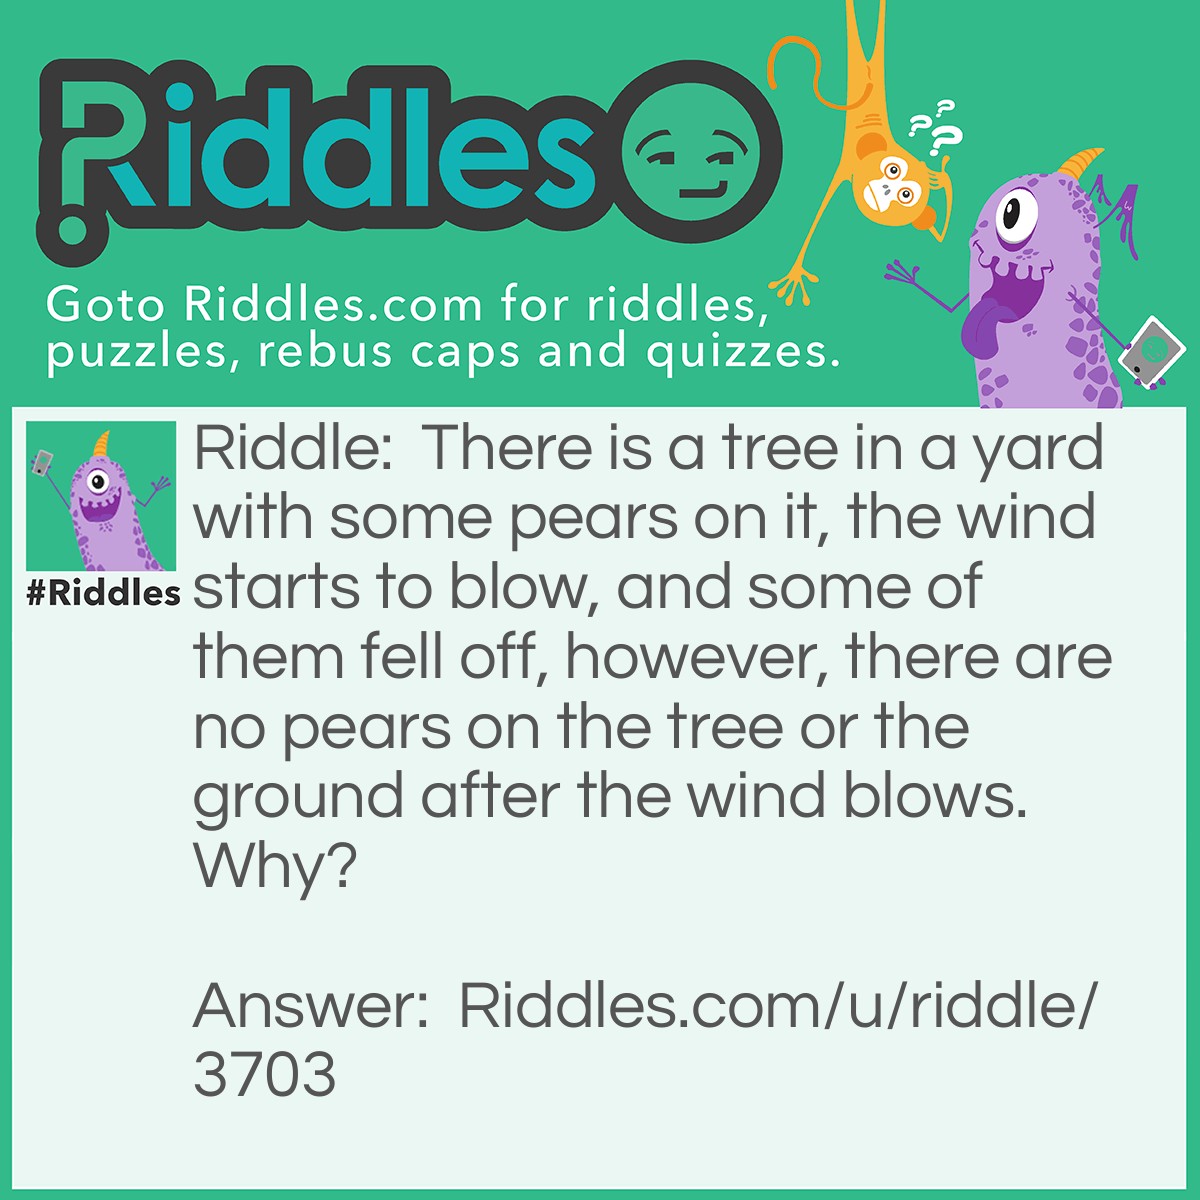 Riddle: There is a tree in a yard with some pears on it, the wind starts to blow, and some of them fell off, however, there are no pears on the tree or the ground after the wind blows. Why? Answer: There were two pears. One fell off, and one stayed on so there wasn't pearS on the ground or on the tree!